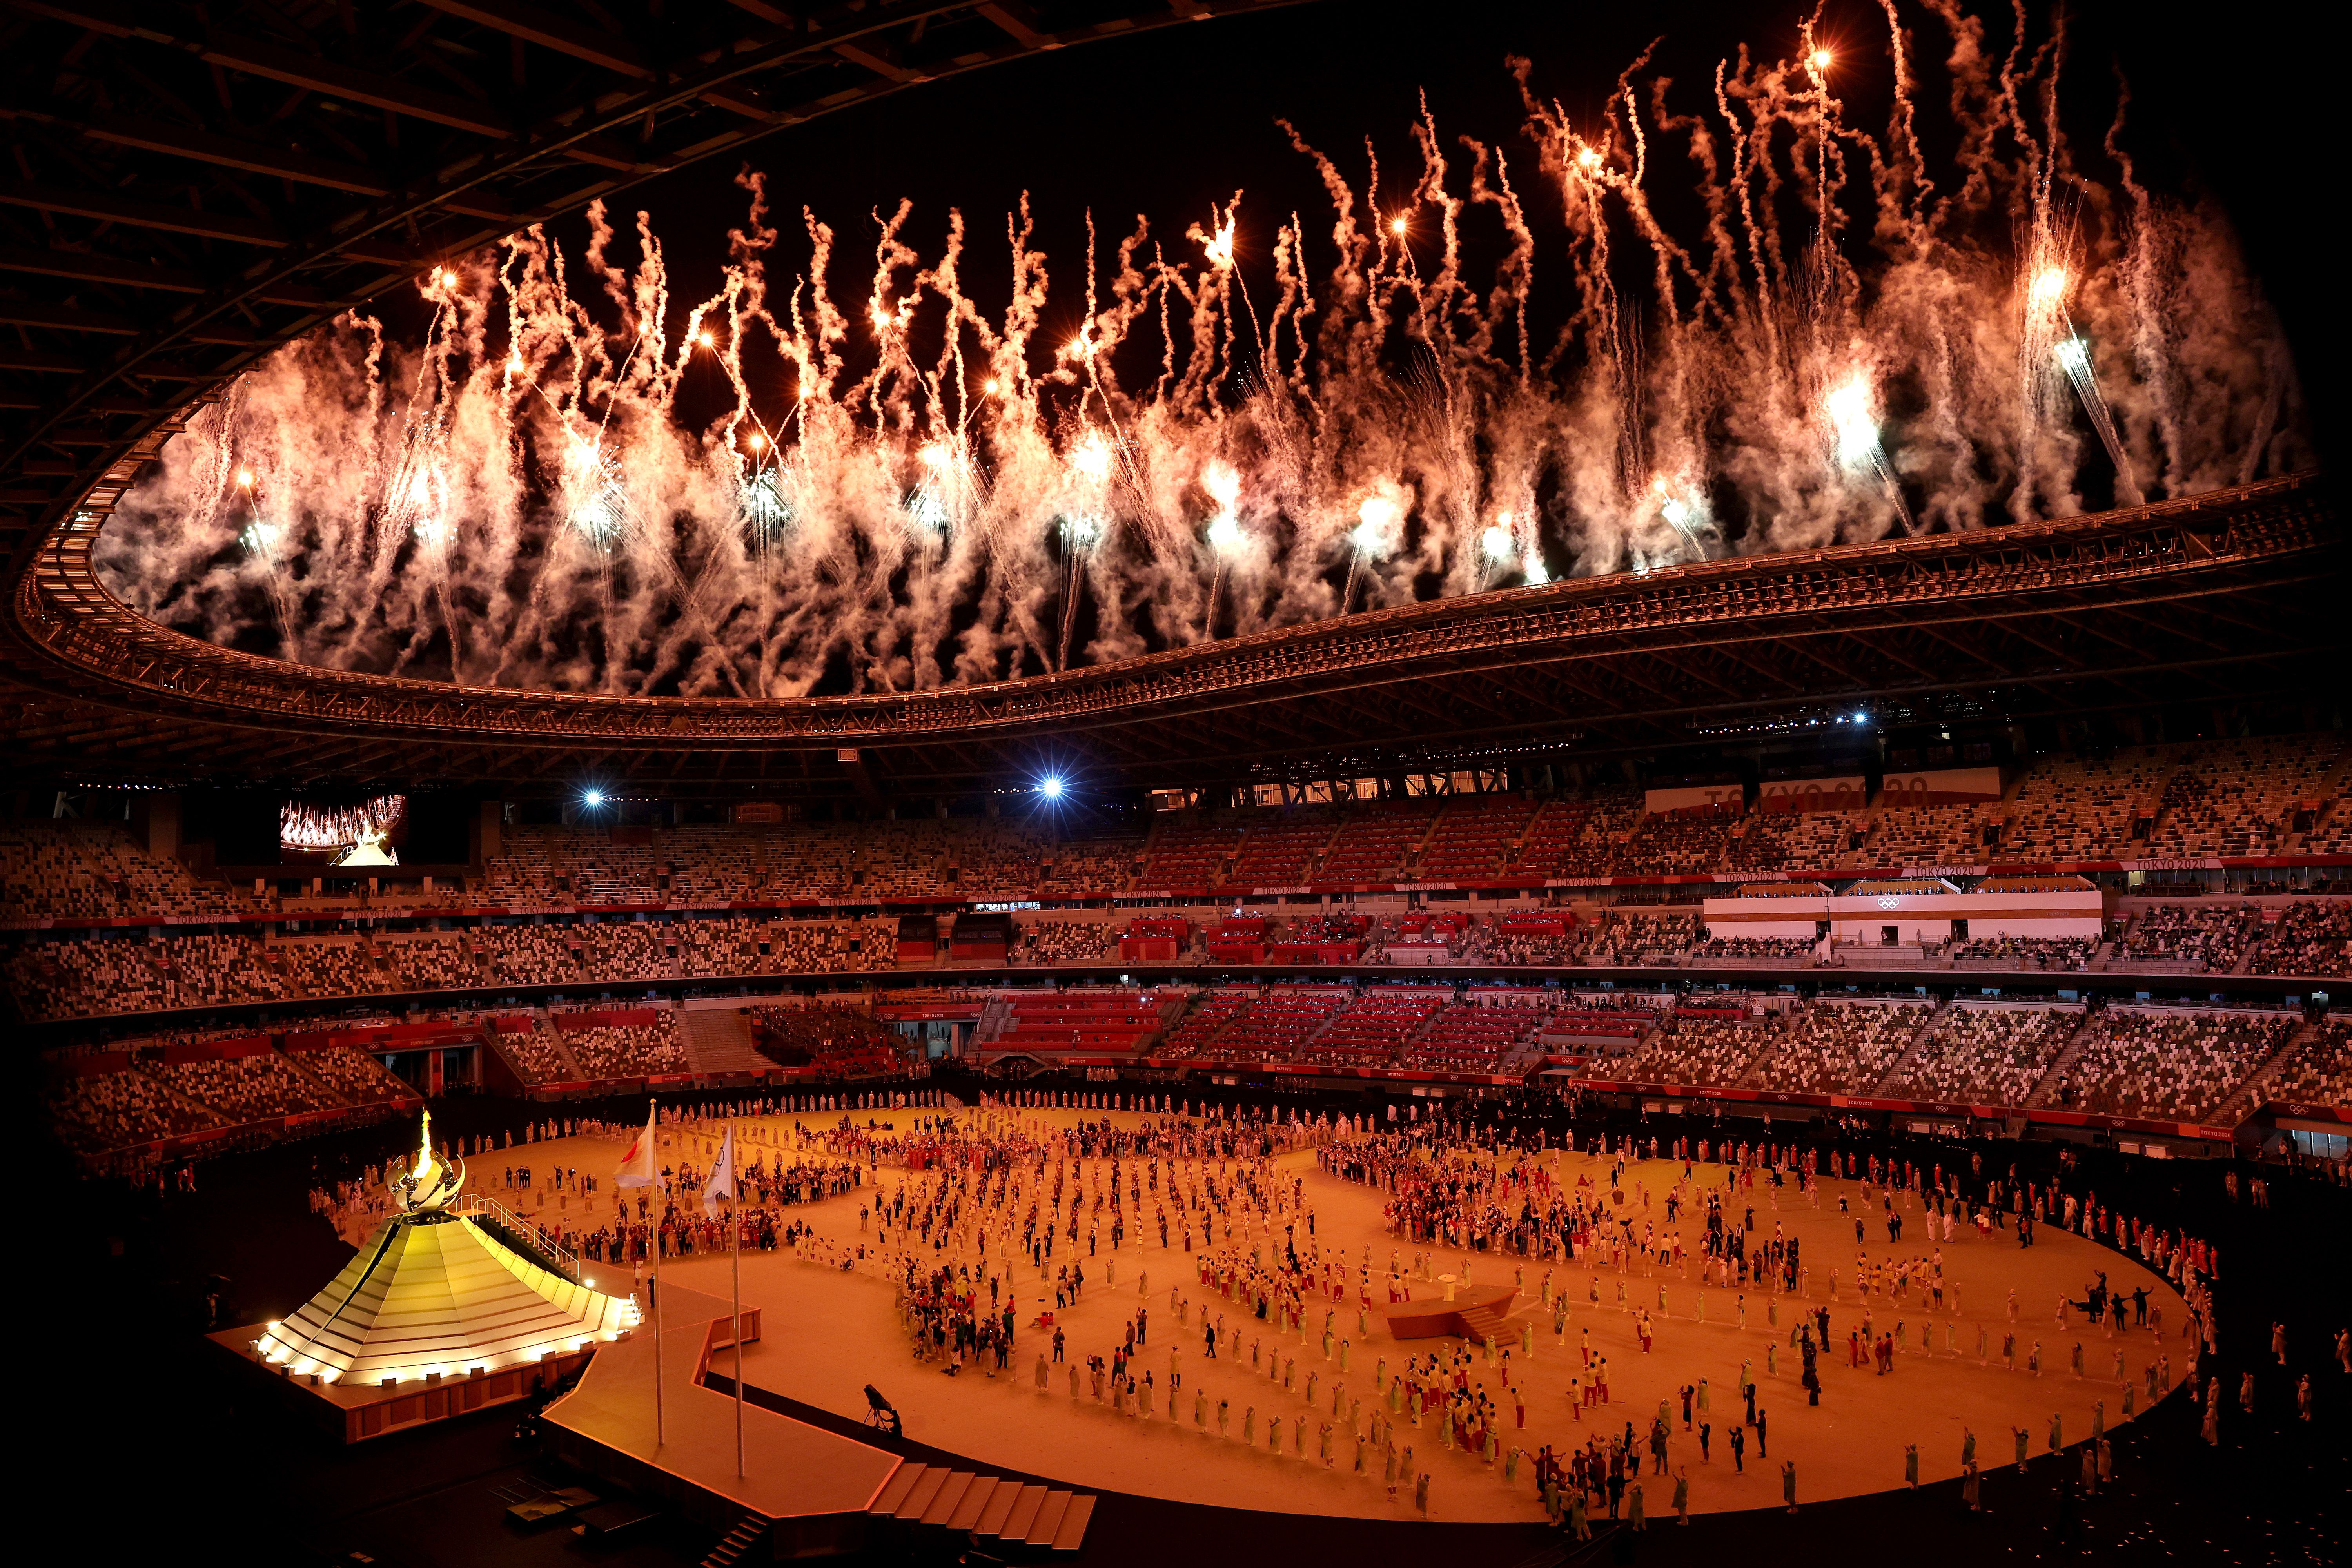 Picture of the Olympic stadium with fireworks going off celebrating the lighting of the cauldron